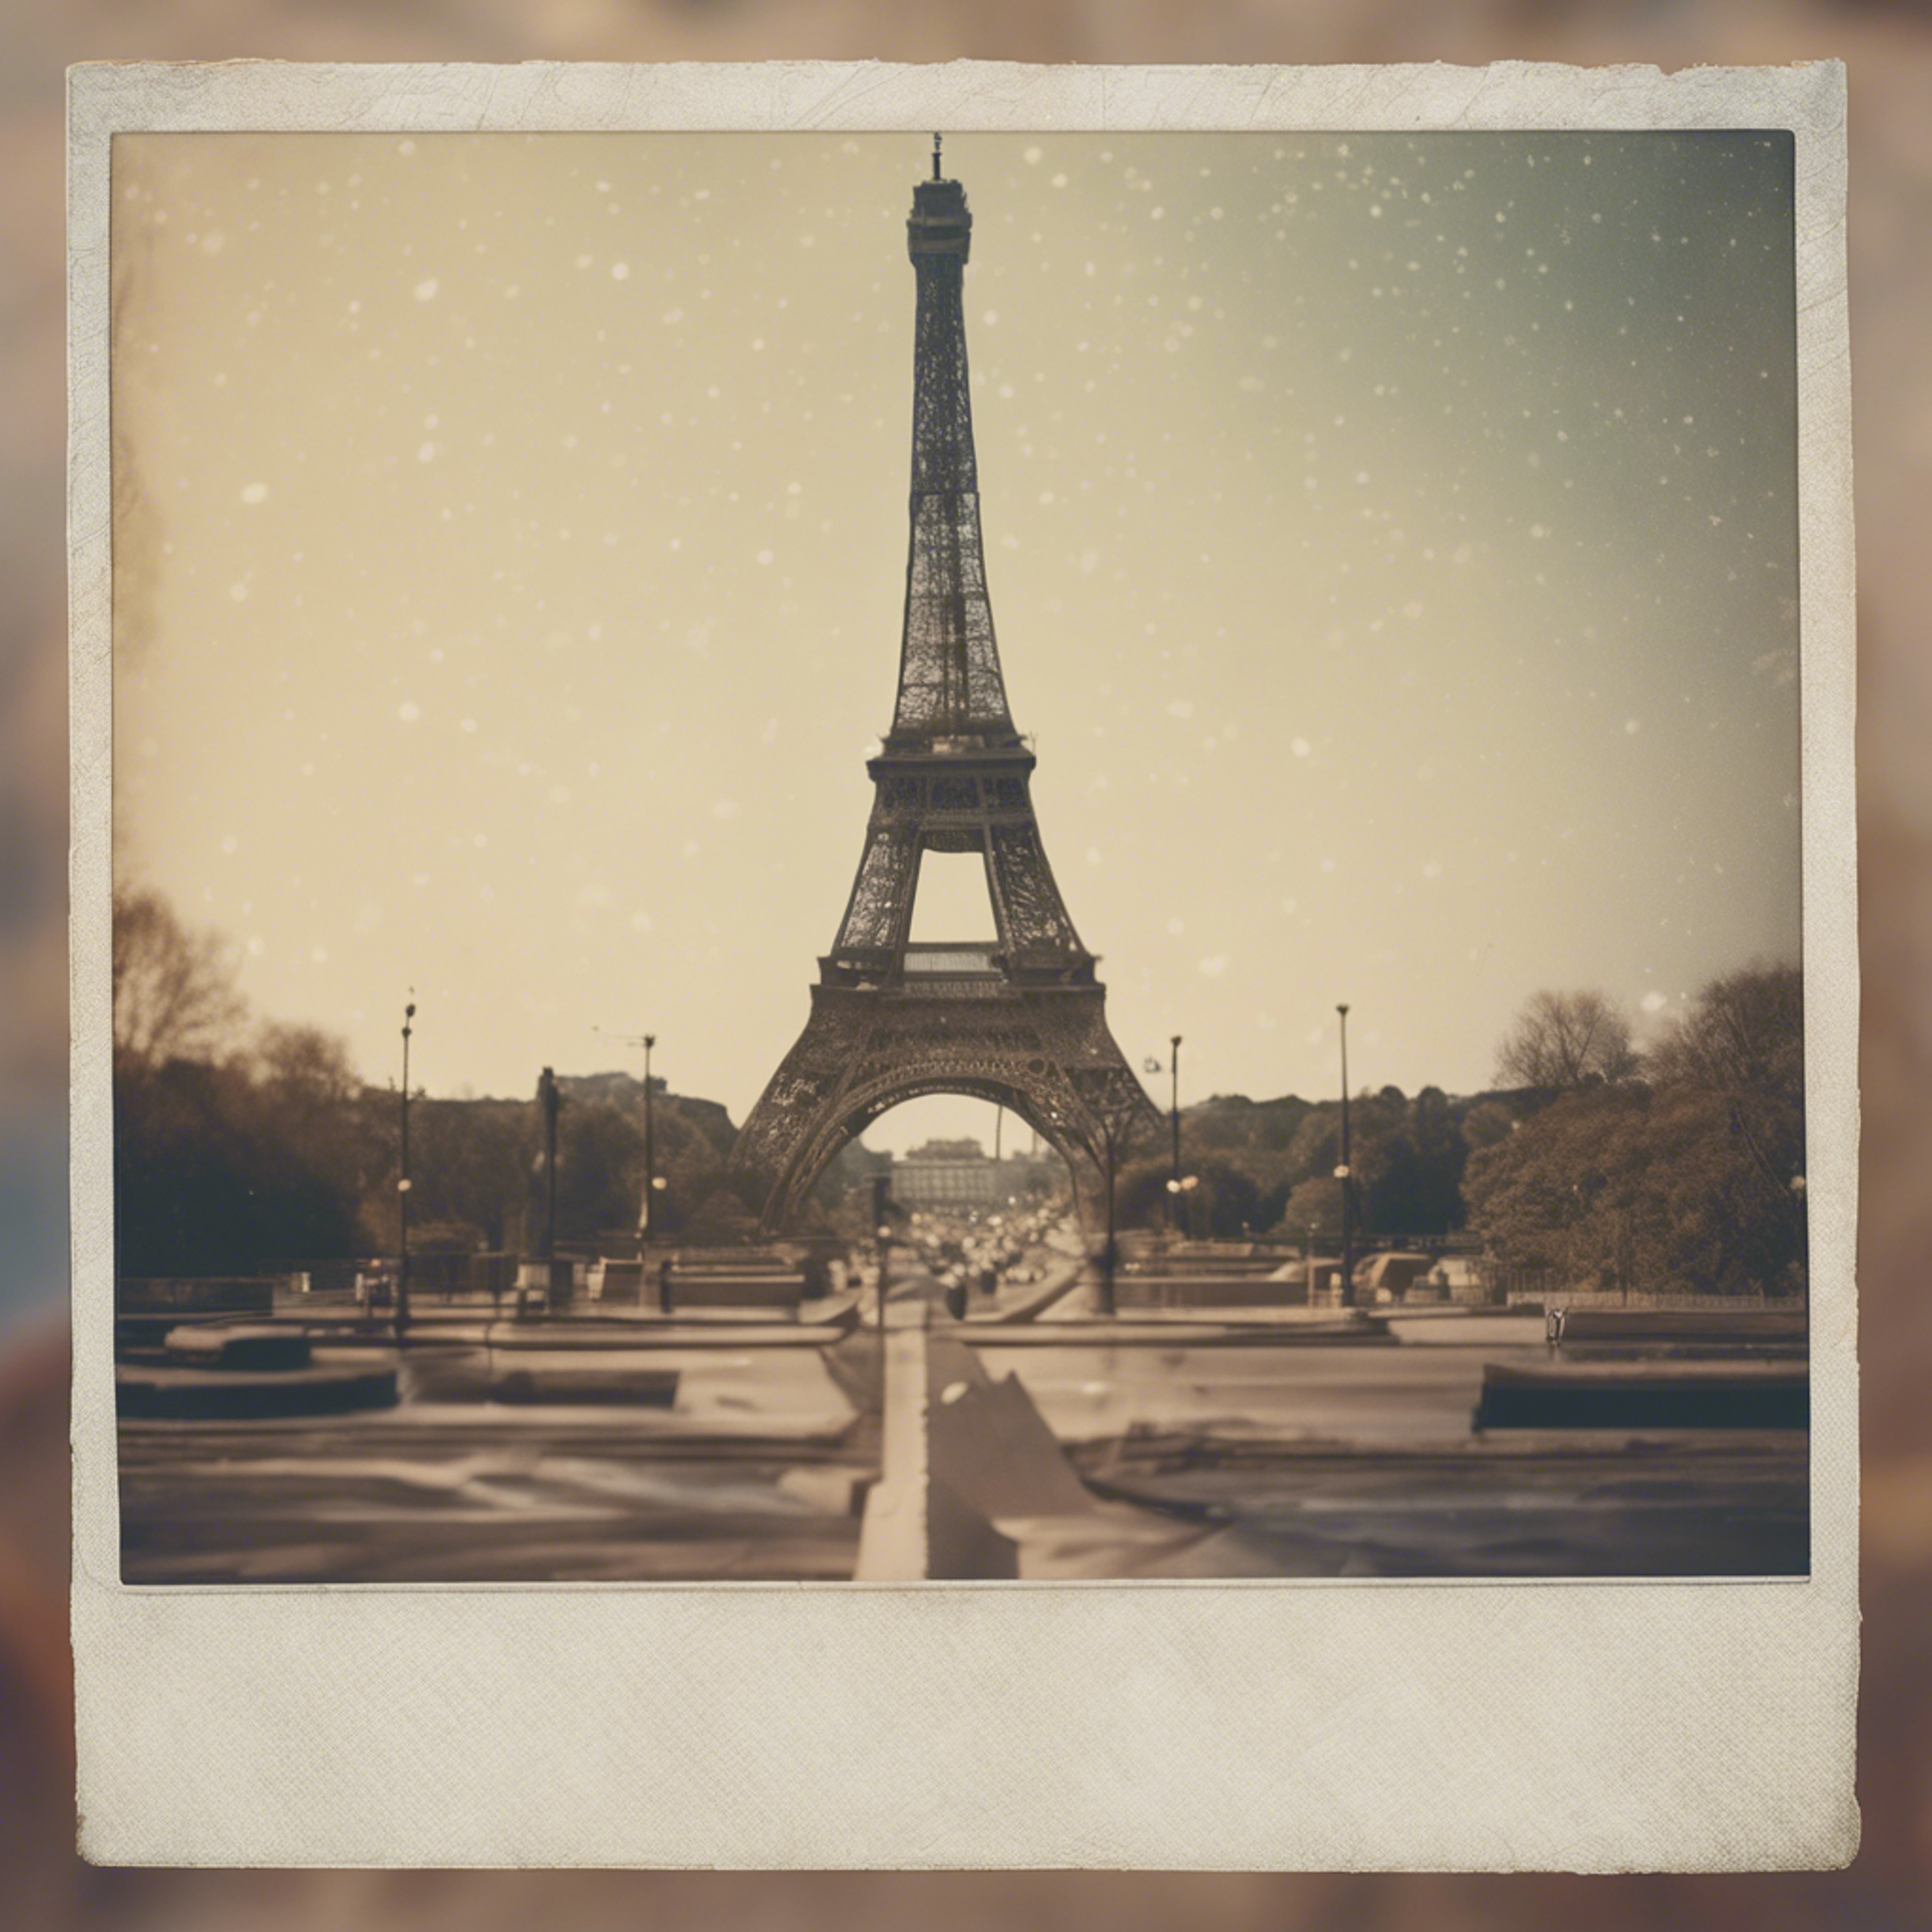 A faded beige Polaroid picture of an iconic landmark from the 70s. Дэлгэцийн зураг[3ceb93f71d2c49b28cf4]